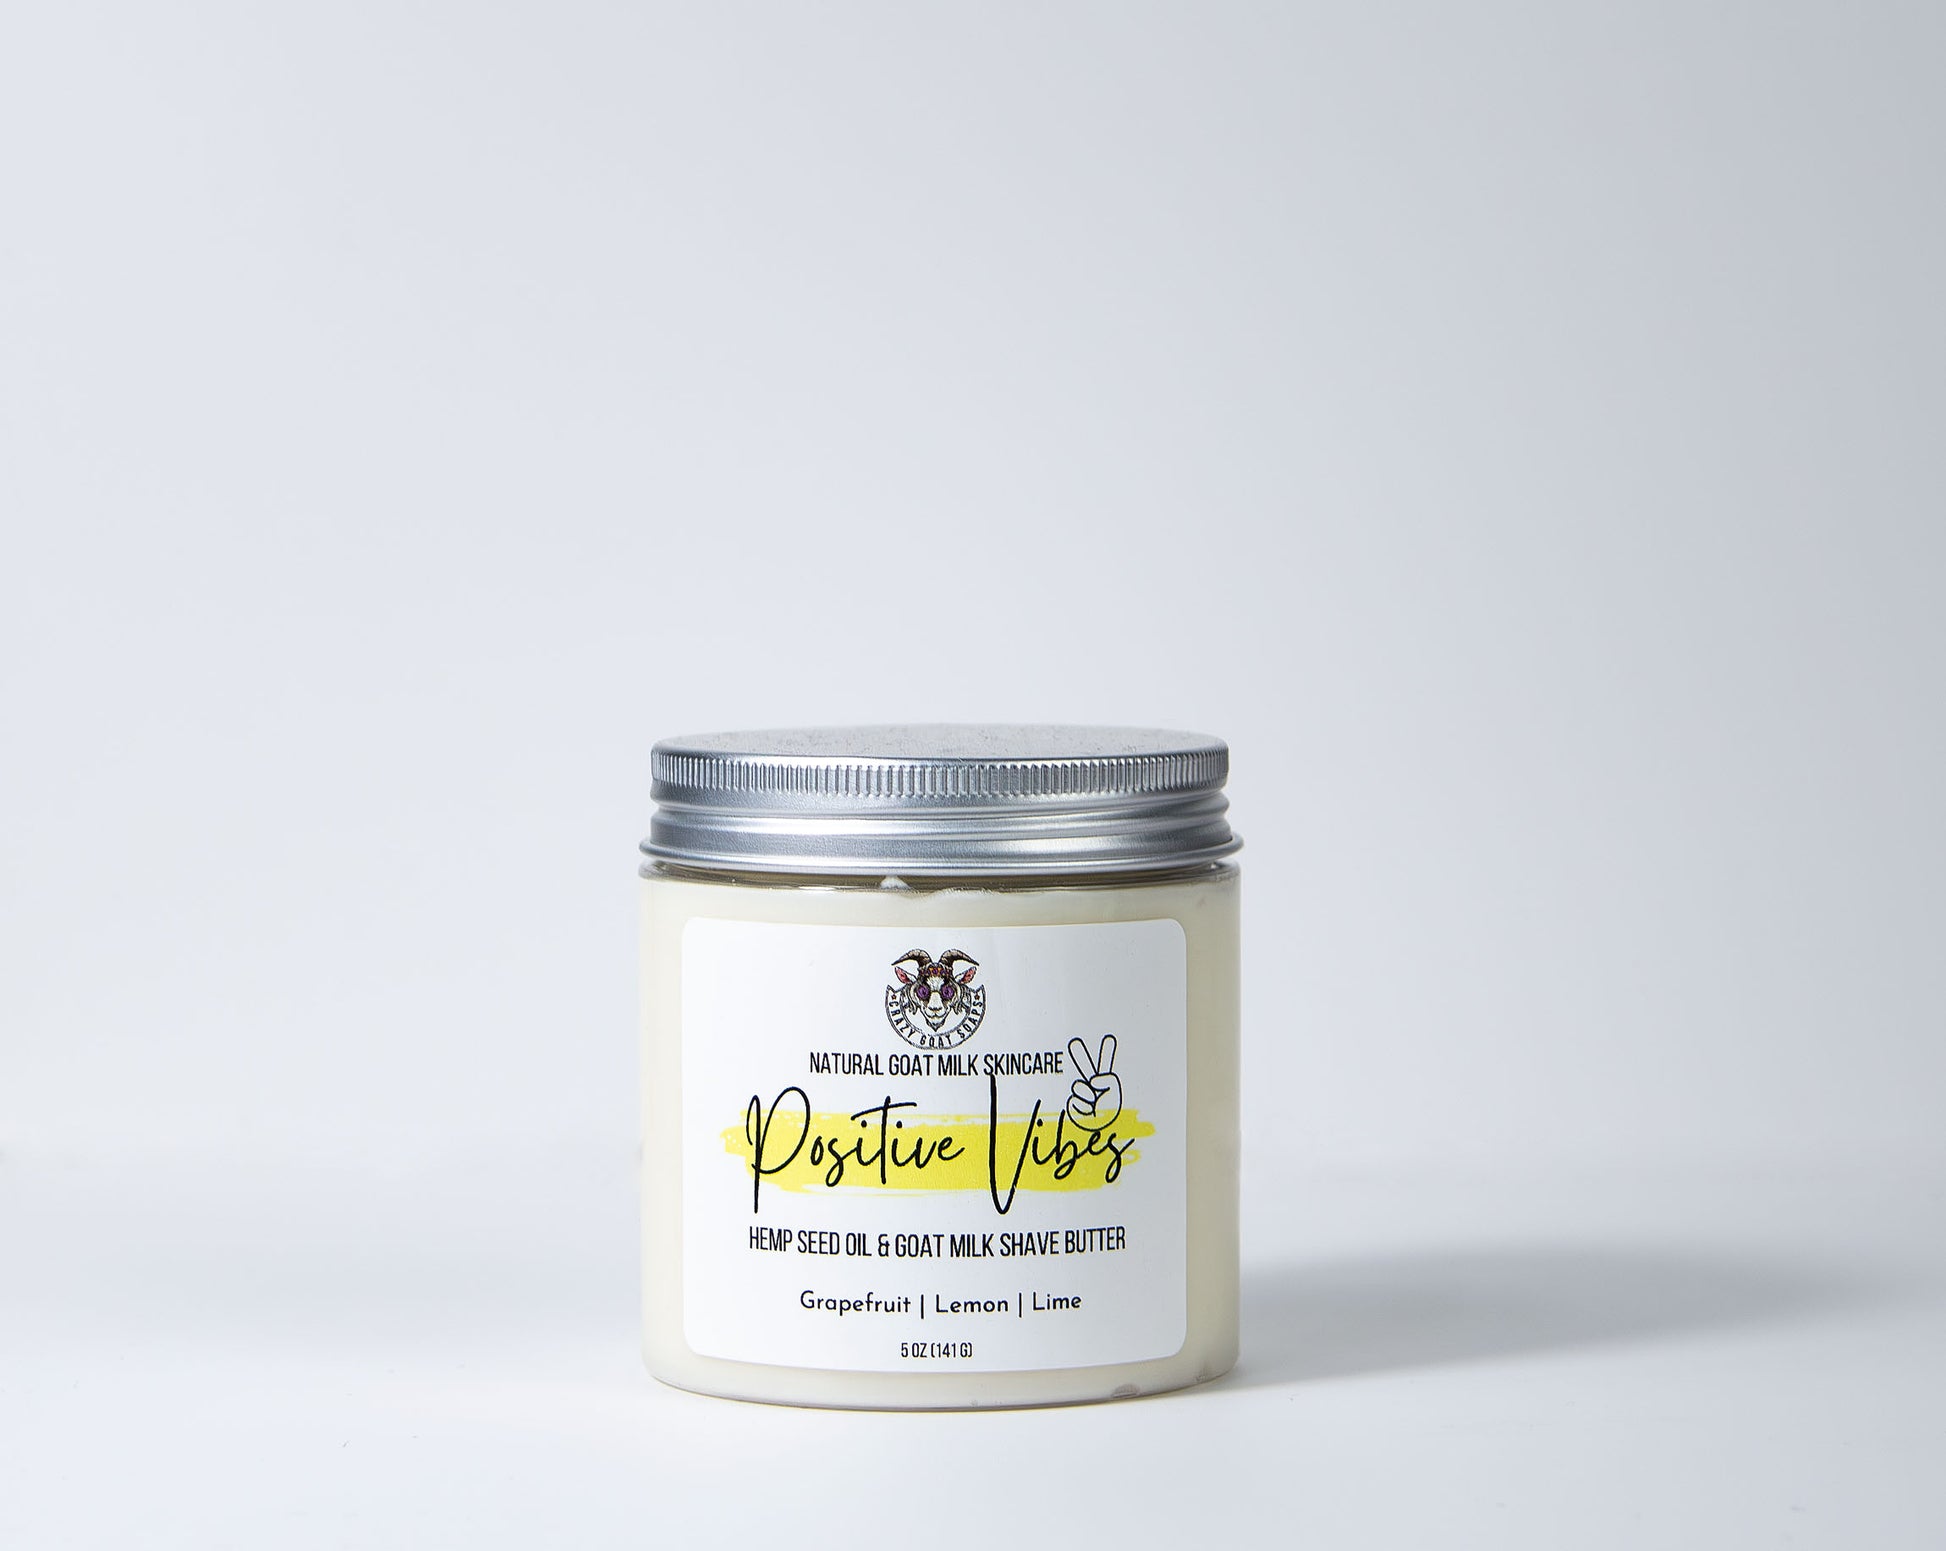 Enjoy Our Positive Vibes Lotion-Like Shave Butter and enjoy soft skin without razor burn. 